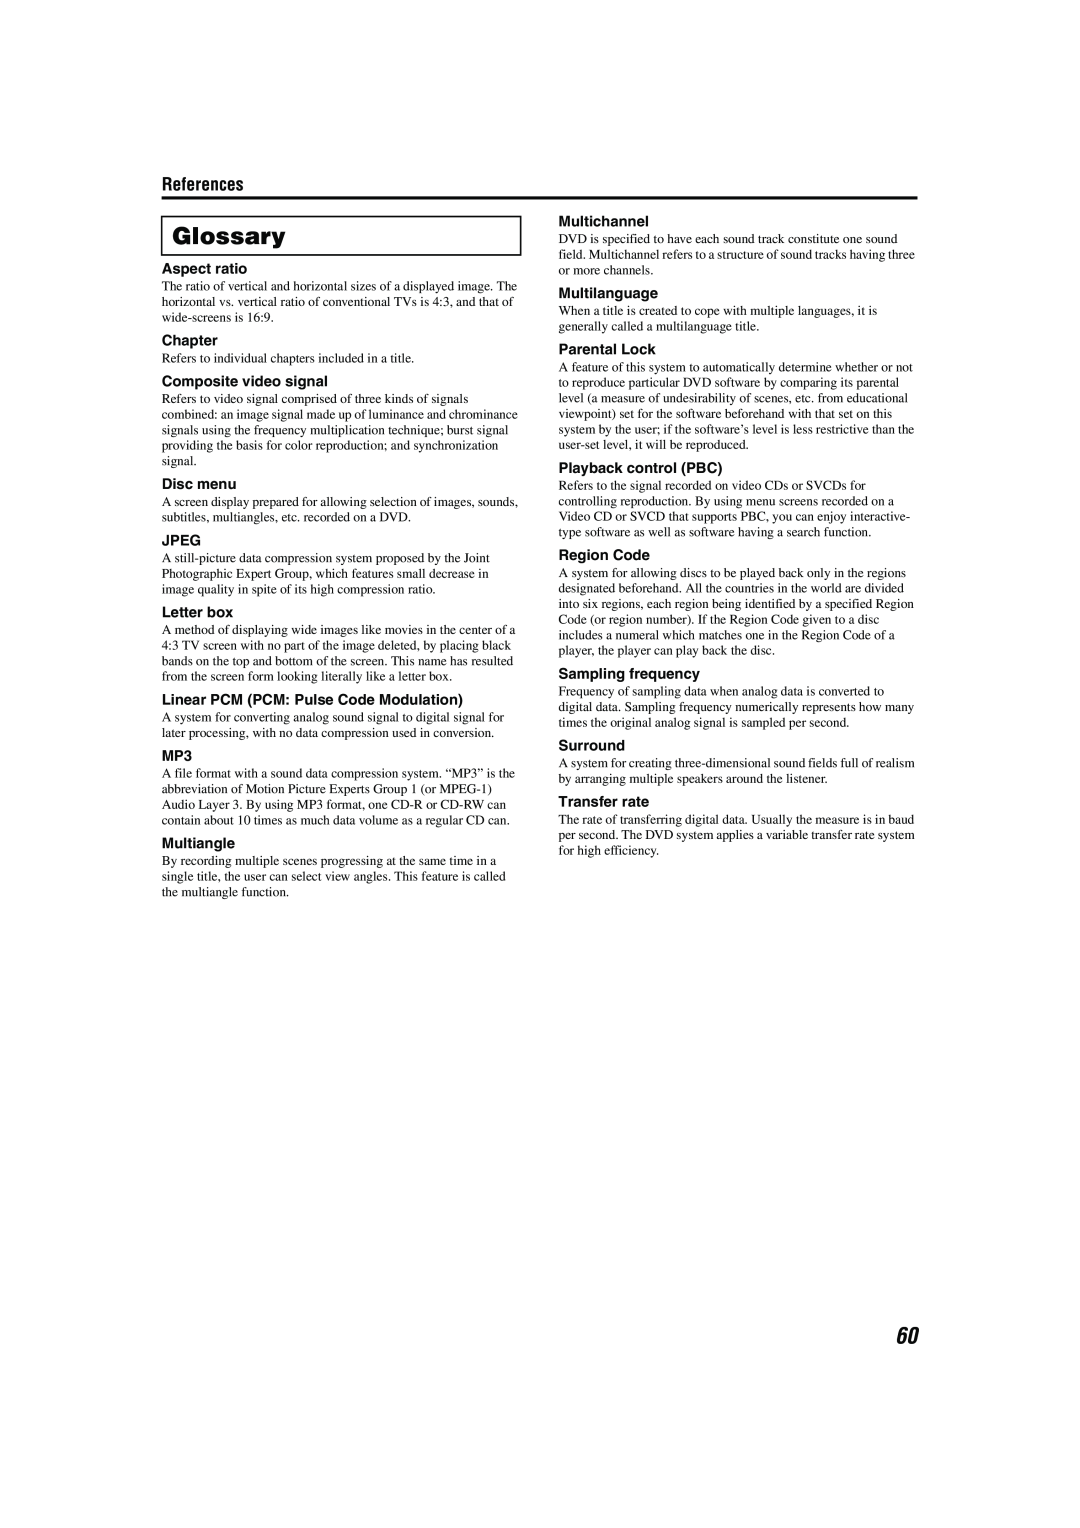 JVC M45 manual Glossary, References 